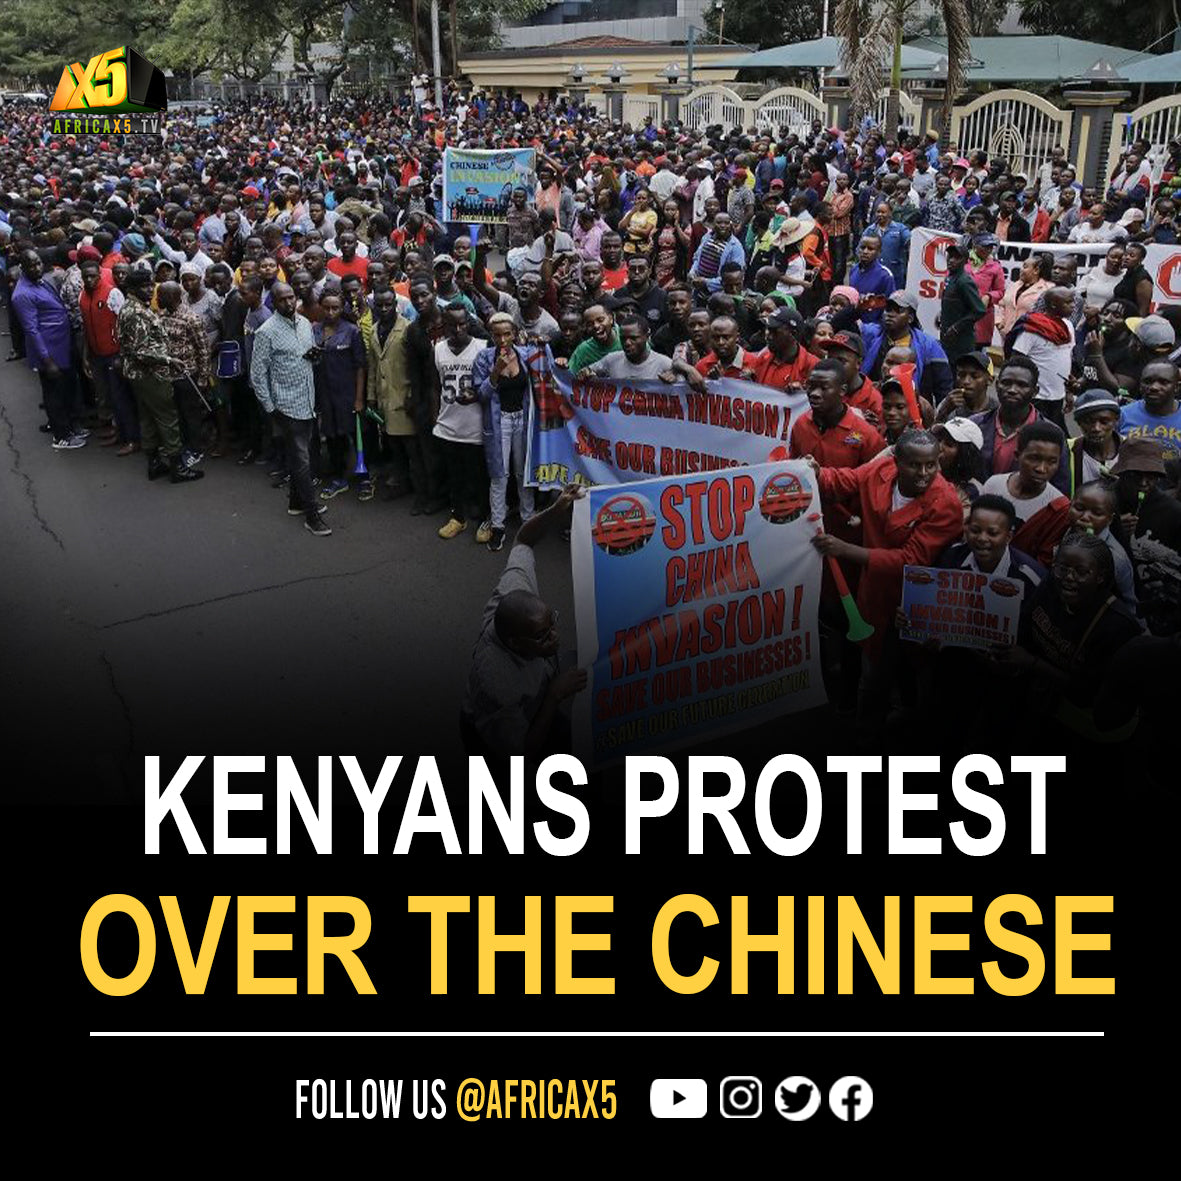 Over a thousand Kenyan traders protested in the capital Nairobi on Tuesday against Chinese traders.